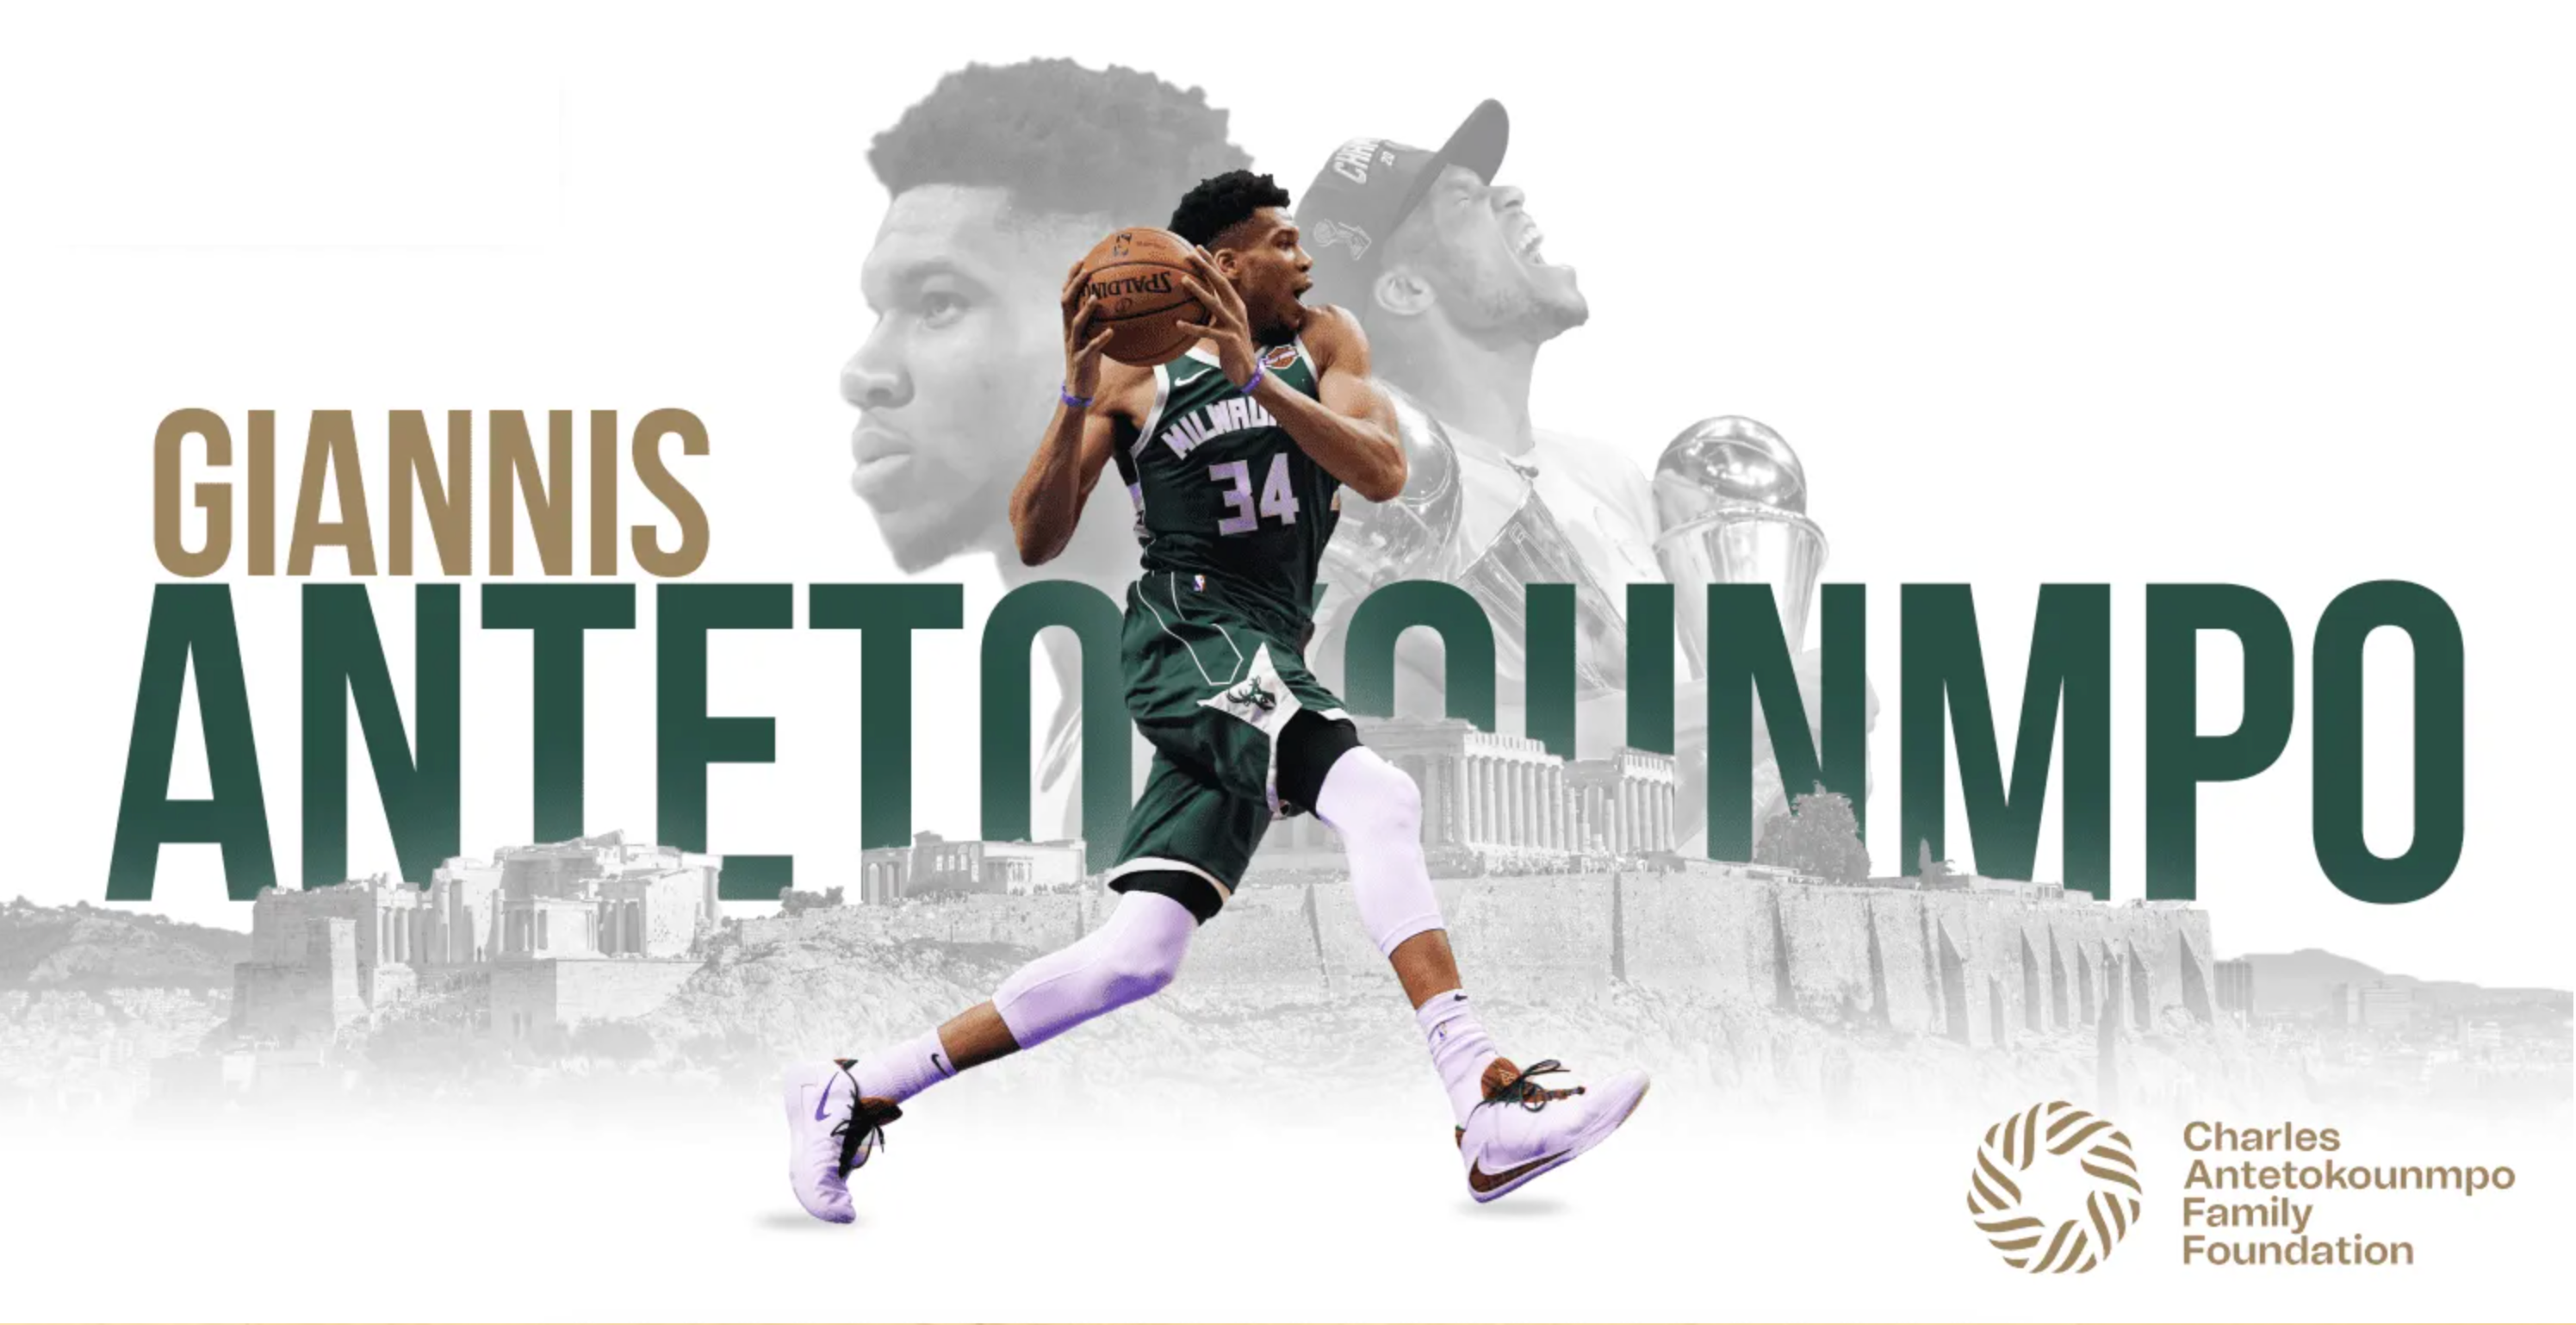 Giannis and Keegan team up to spread opportunities.